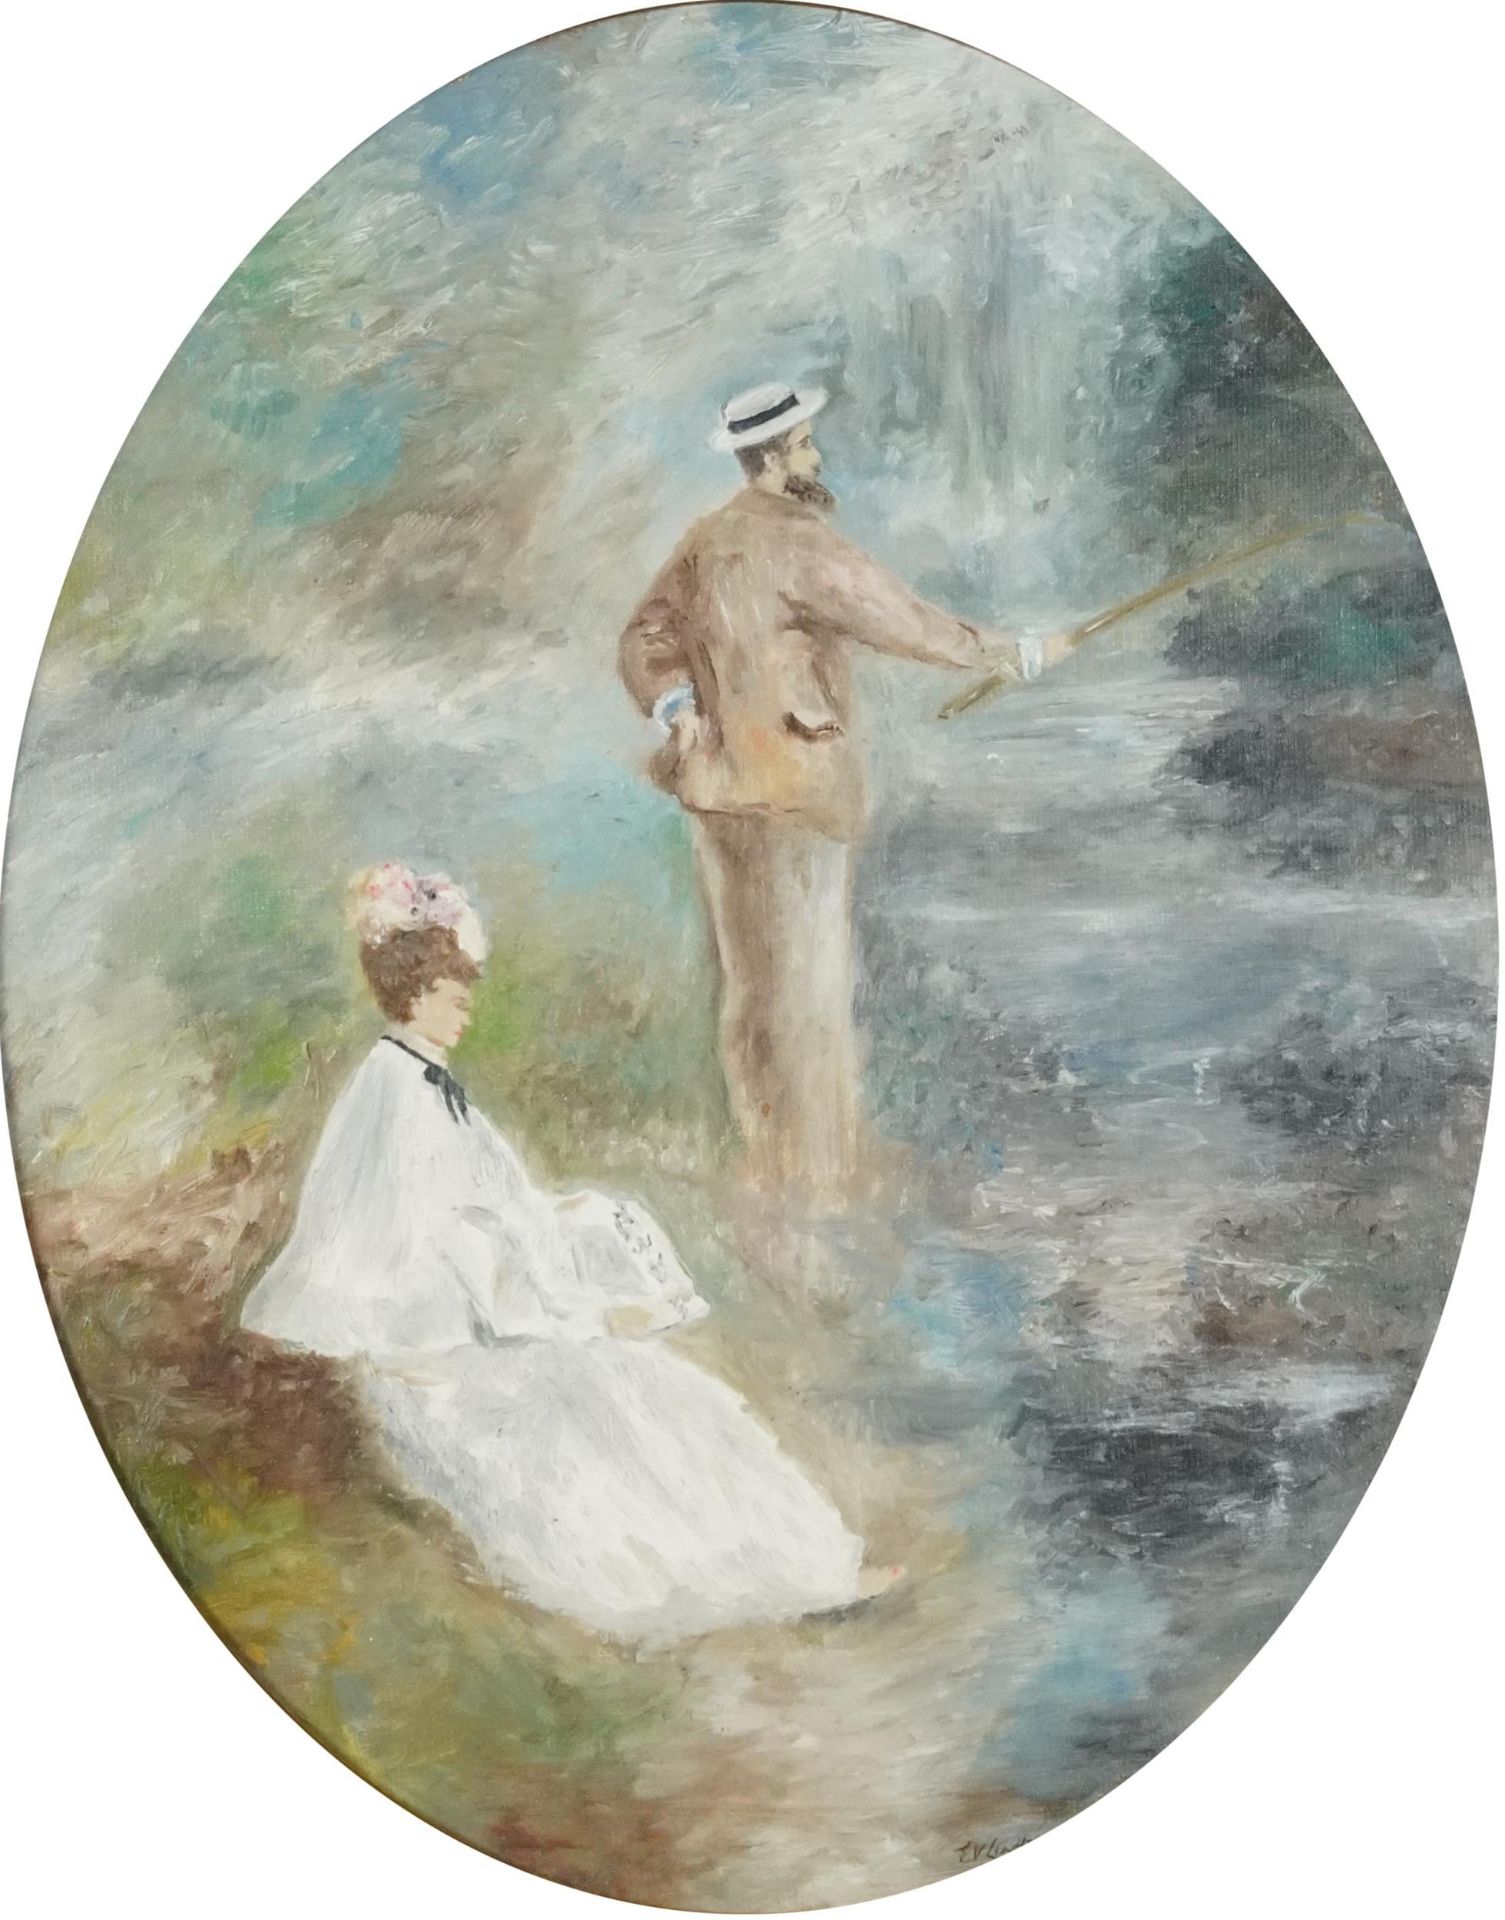 Gentlemen fishing with and admirer, French Impressionist oval oil on board, framed, 49.5cm x 39cm